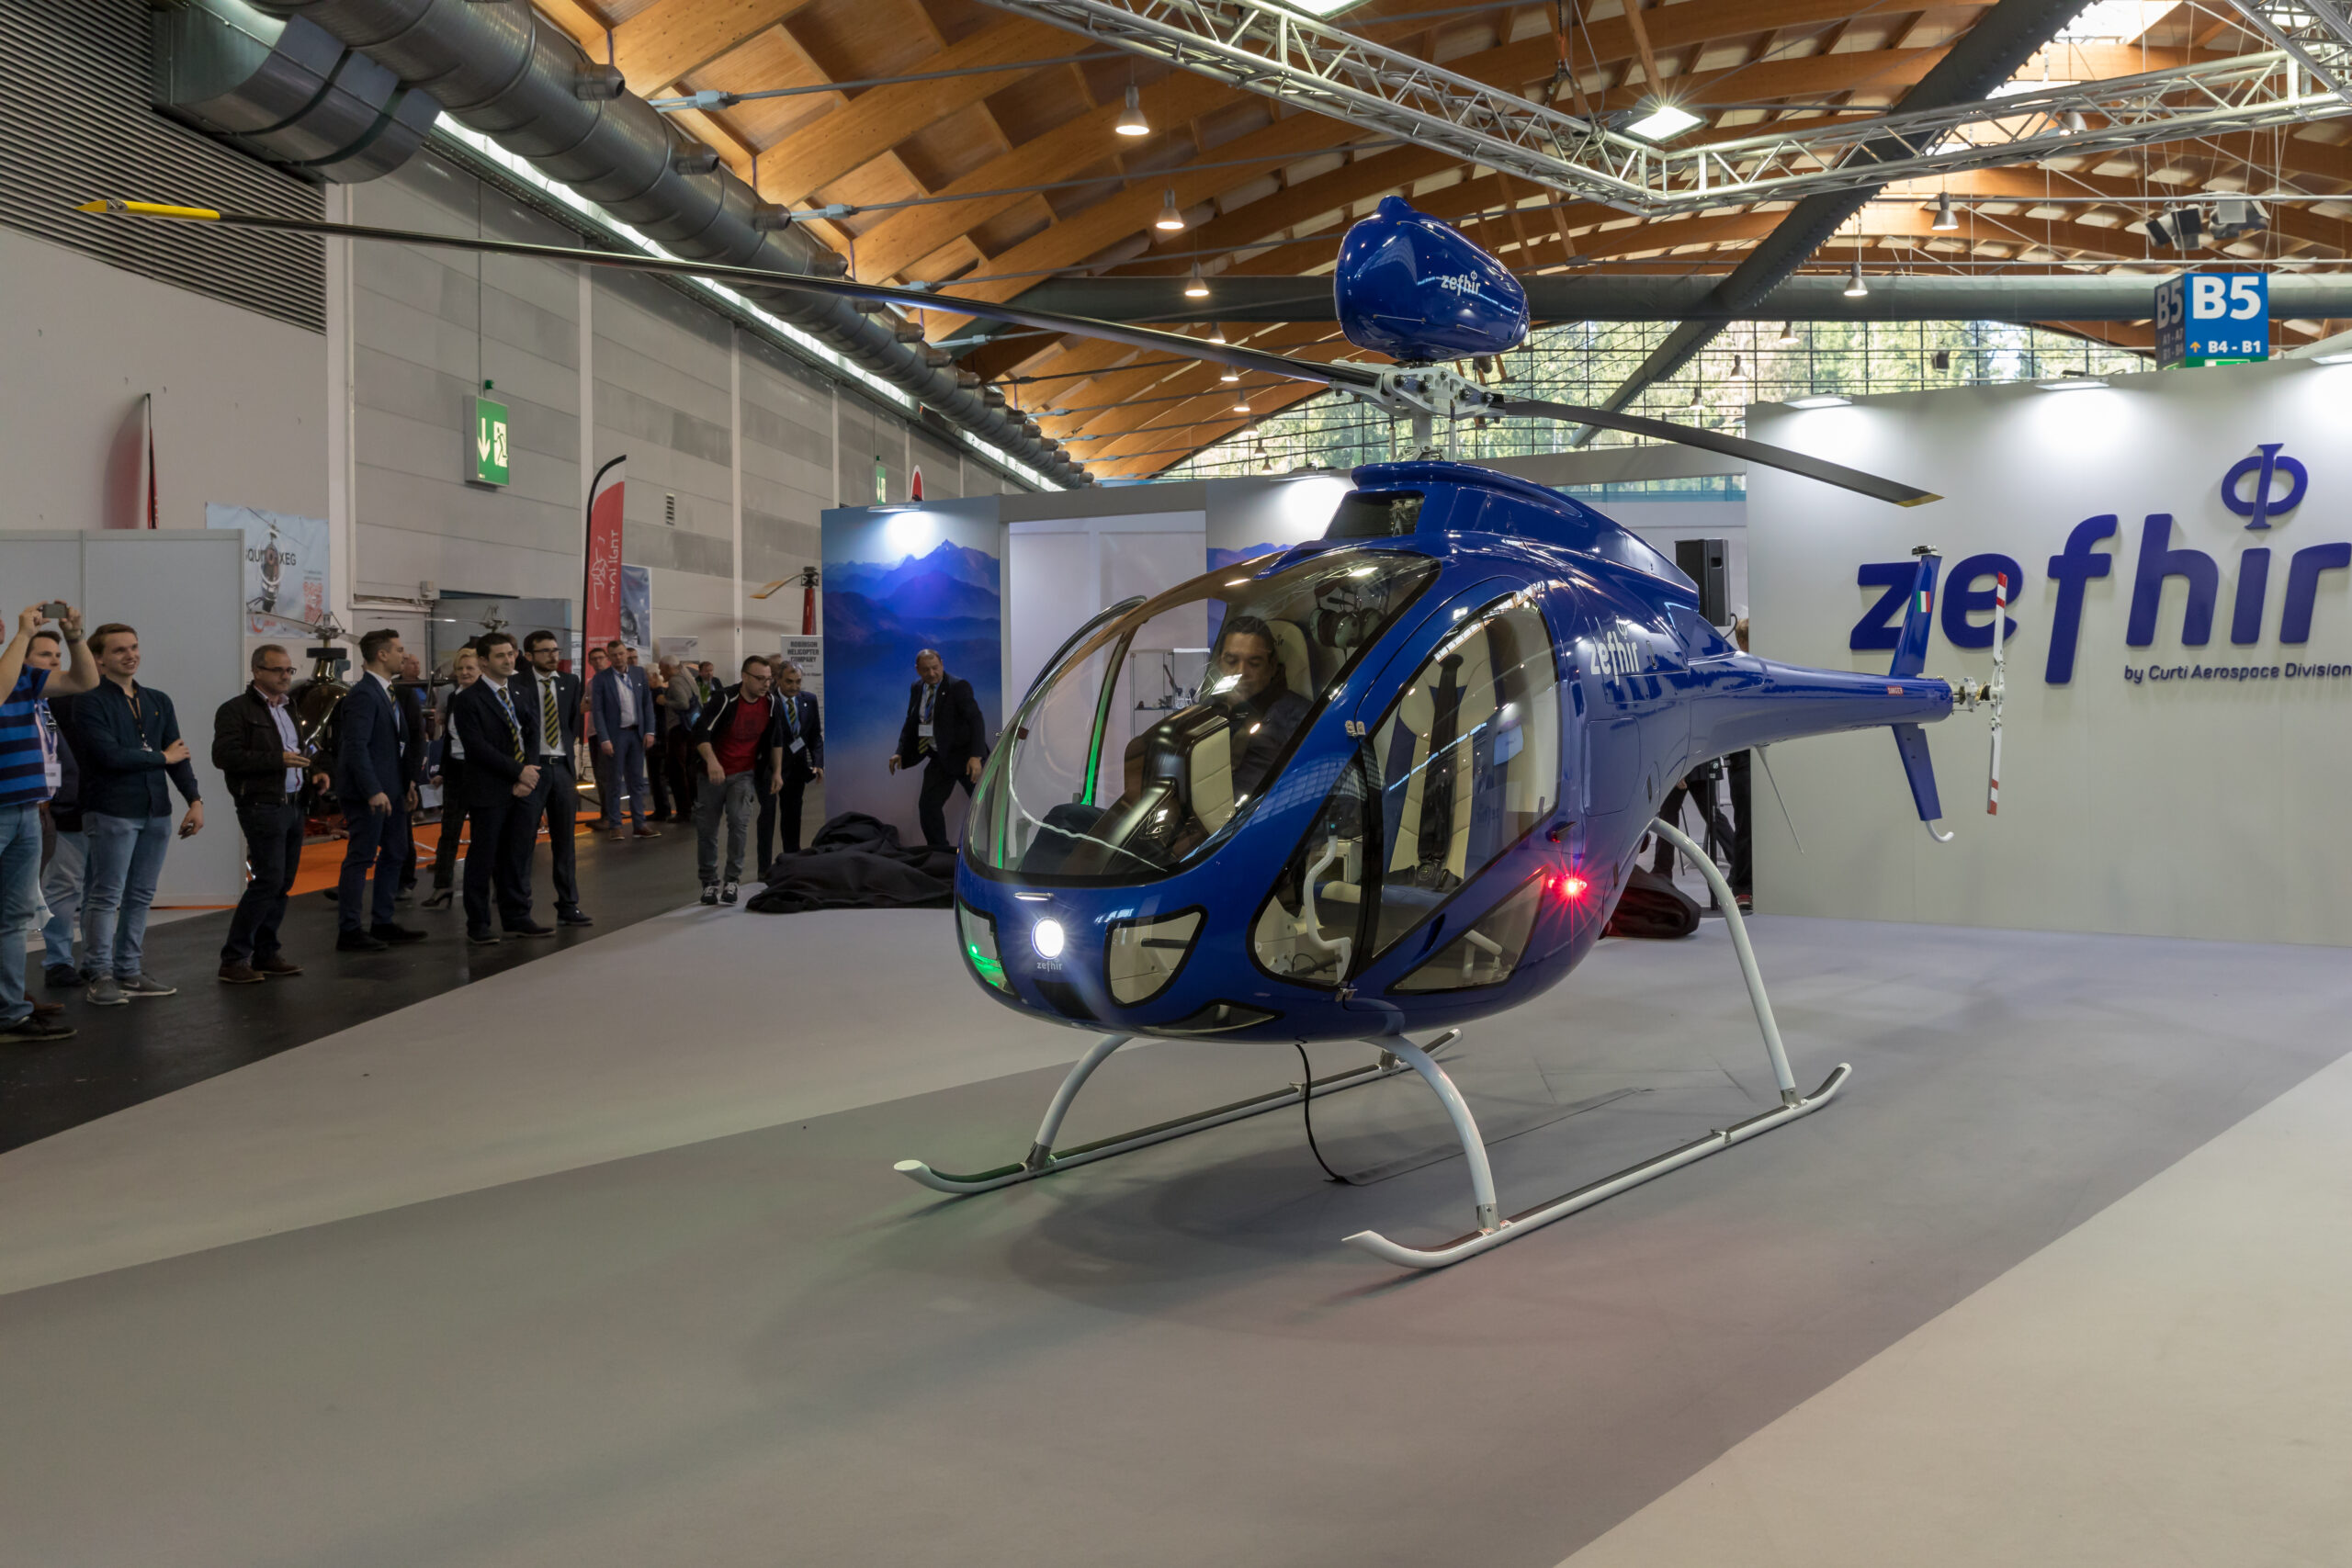 What Are the Latest Trends in Private Helicopter Design